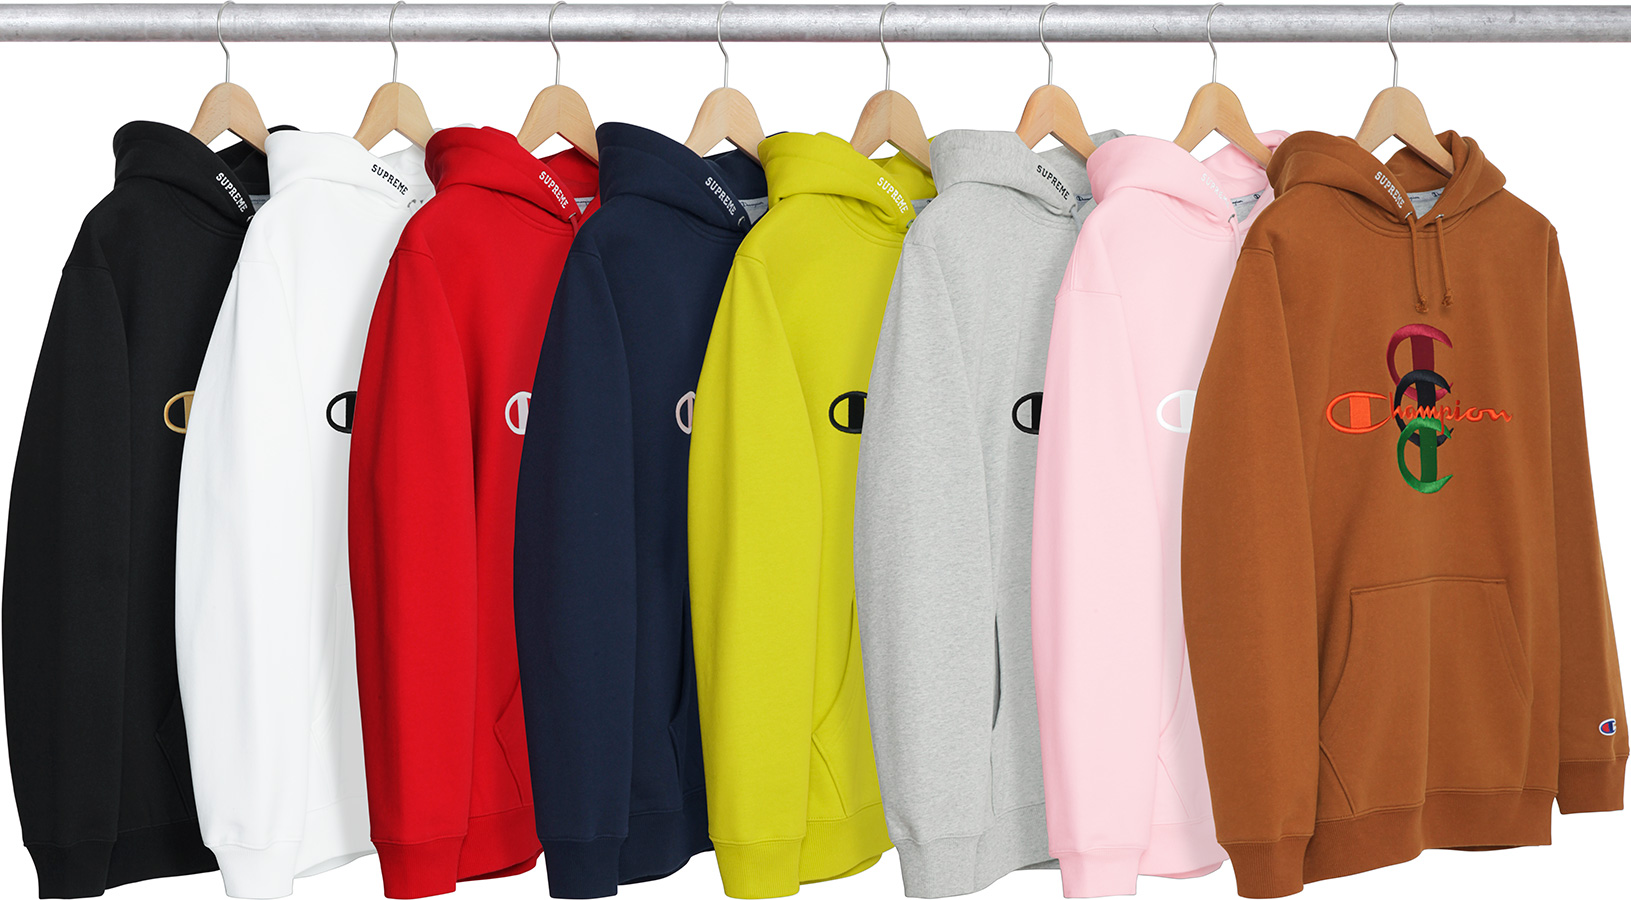 supreme champion stacked hoodie